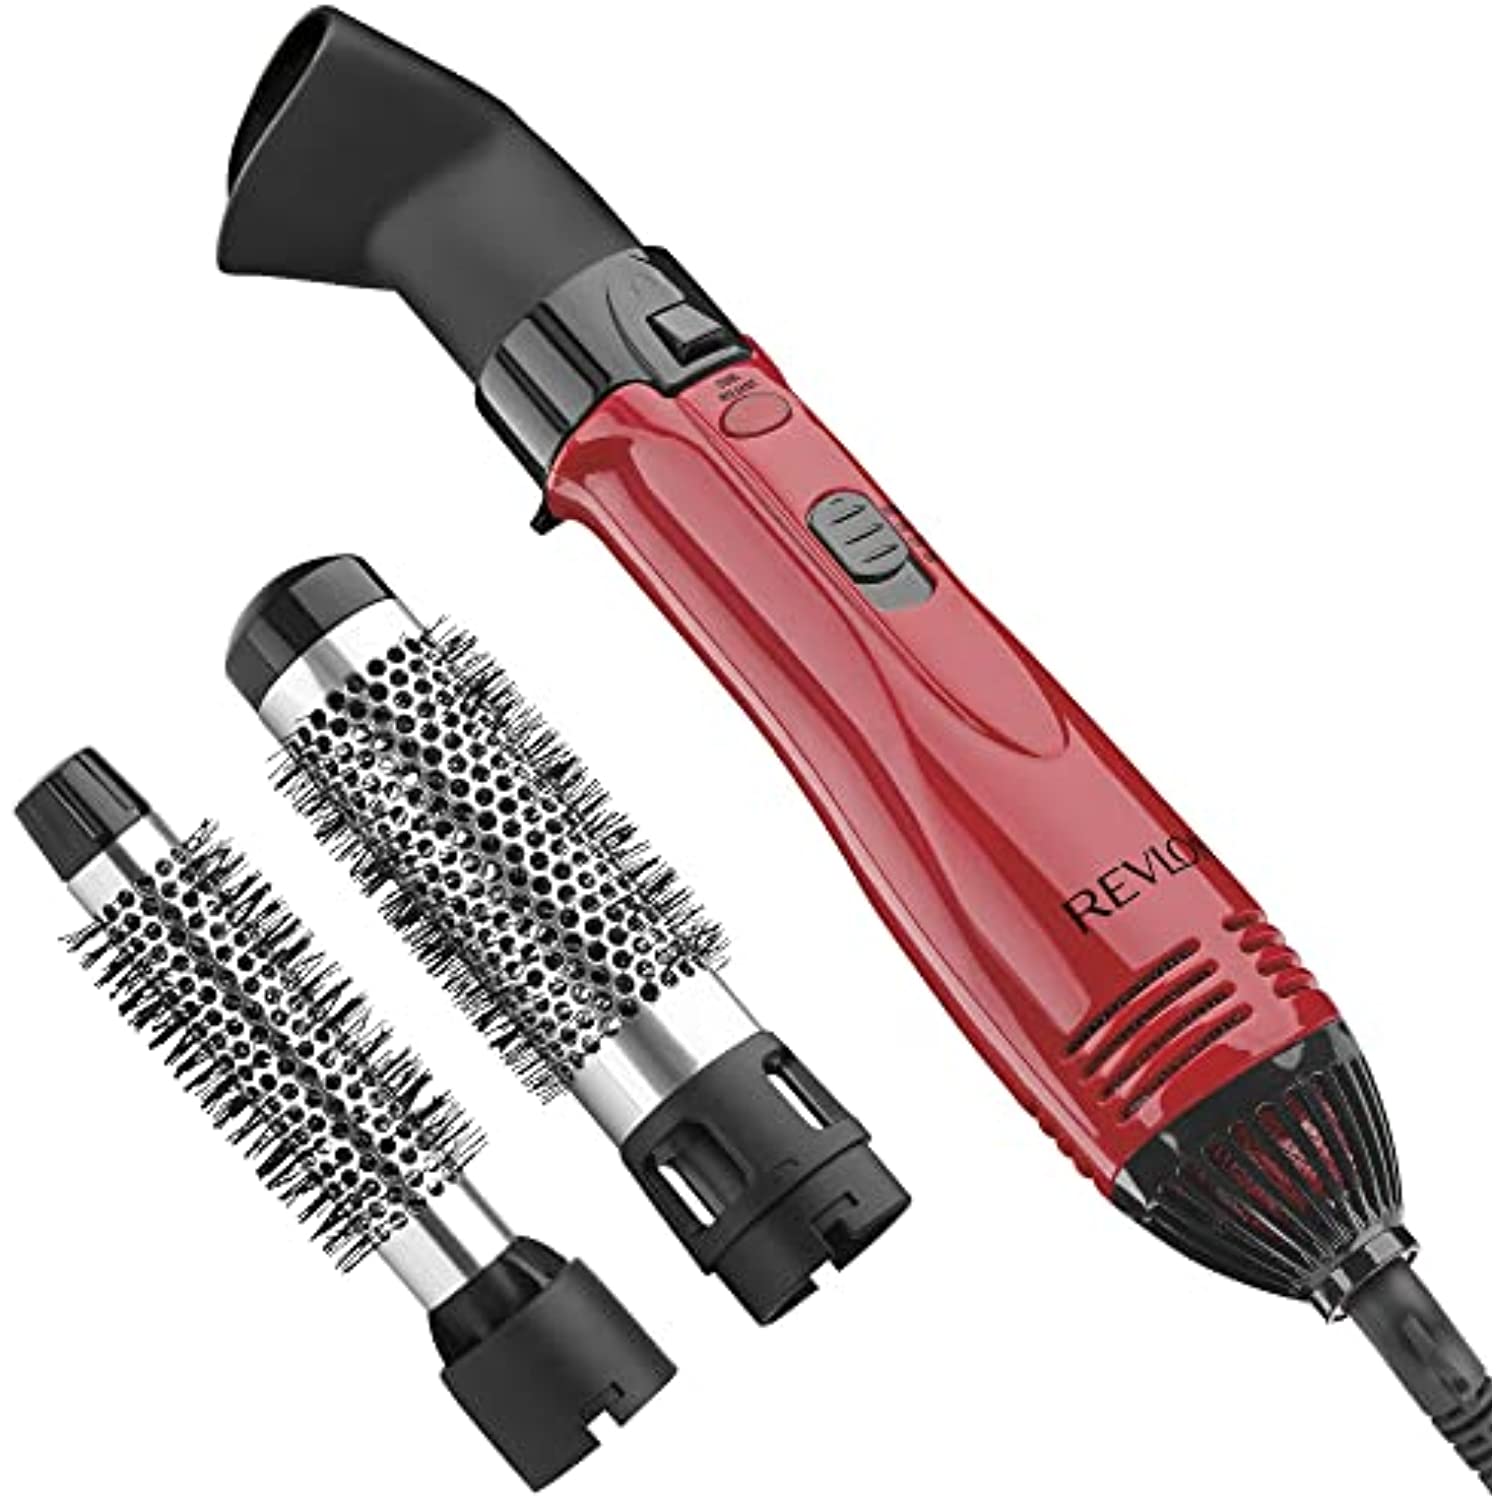 Revlon 1200W Style, Curl, And Volumize Hot Air Kit, 3 Piece Set - image 1 of 3